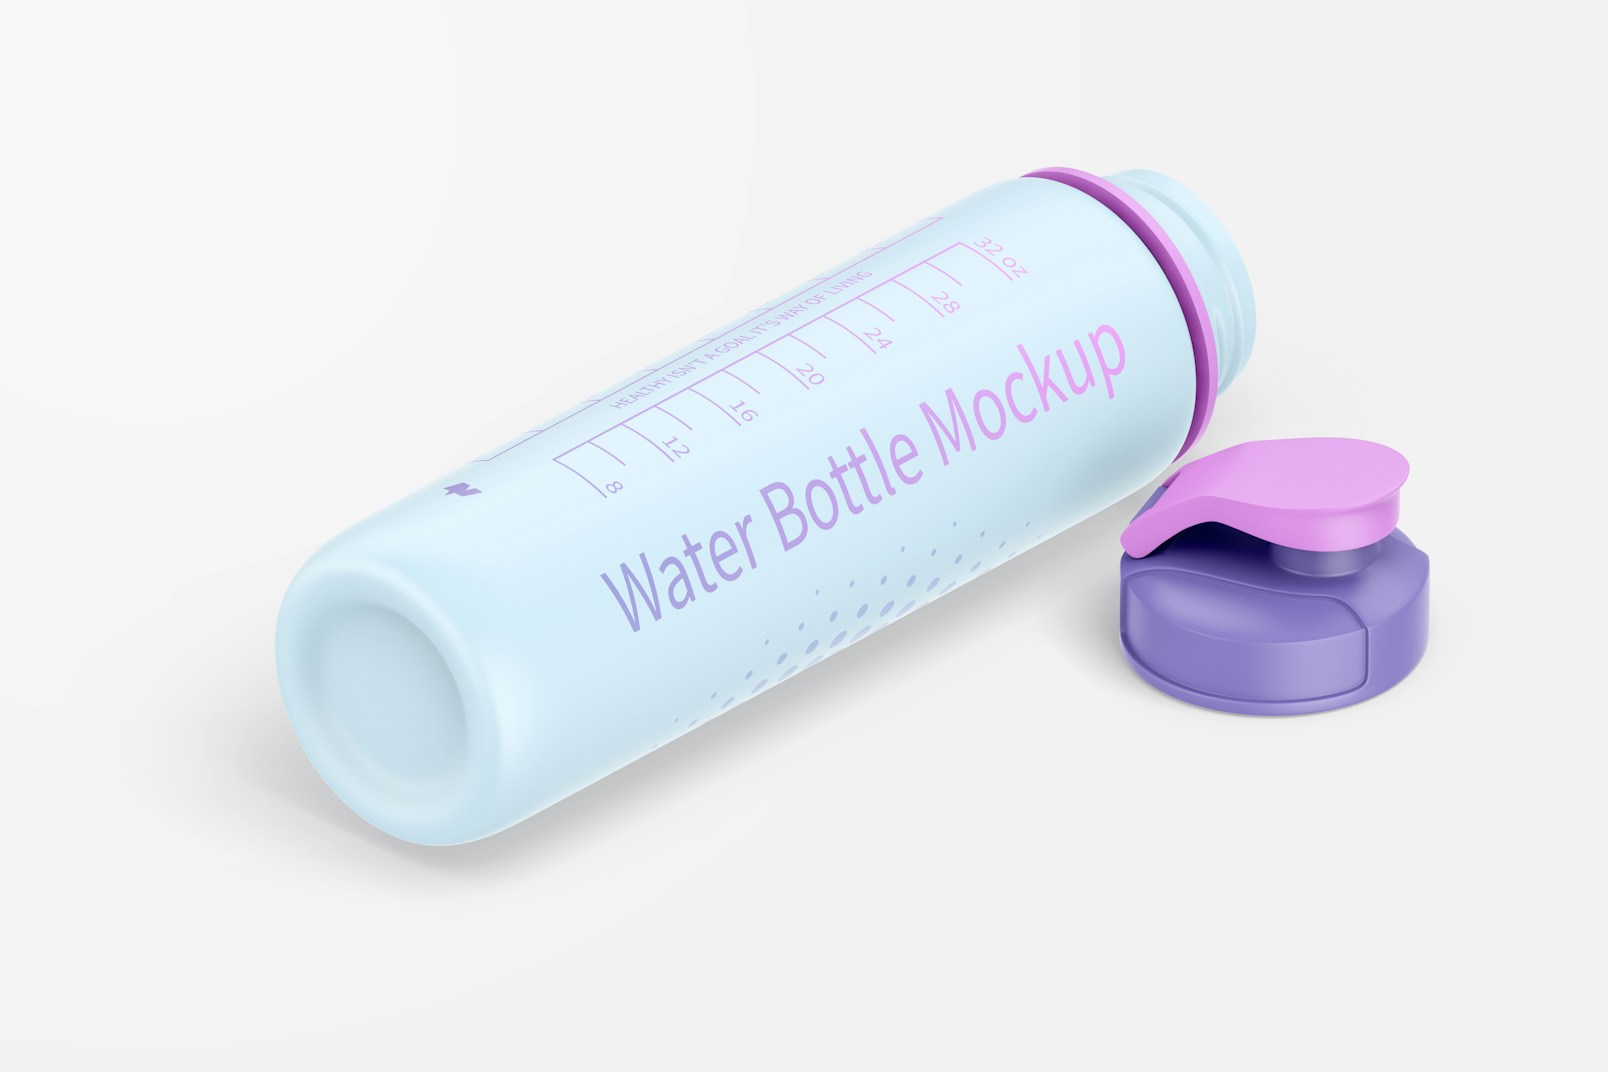 32 oz Water Bottle Mockup, Isometric Right View